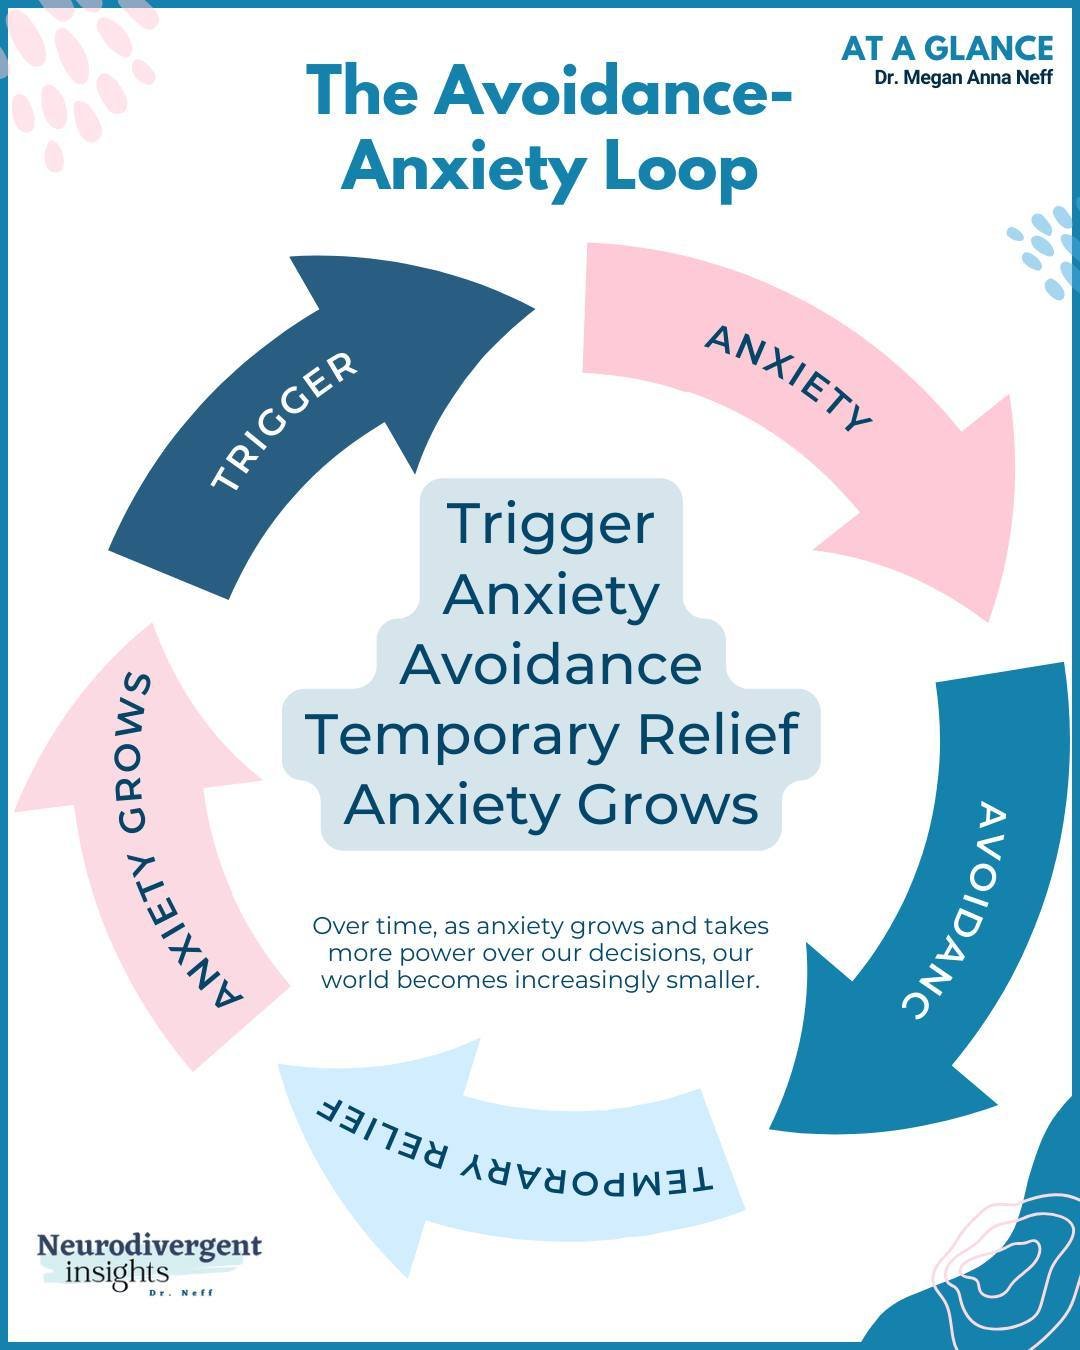 In today's blog post, I outline some of the standard treatments for anxiety and discuss how it should be adapted for Autistic people. Key to understanding any approach to anxiety treatment is the concept of the Avoidance-Anxiety Loop.⁠
⁠
This loop st